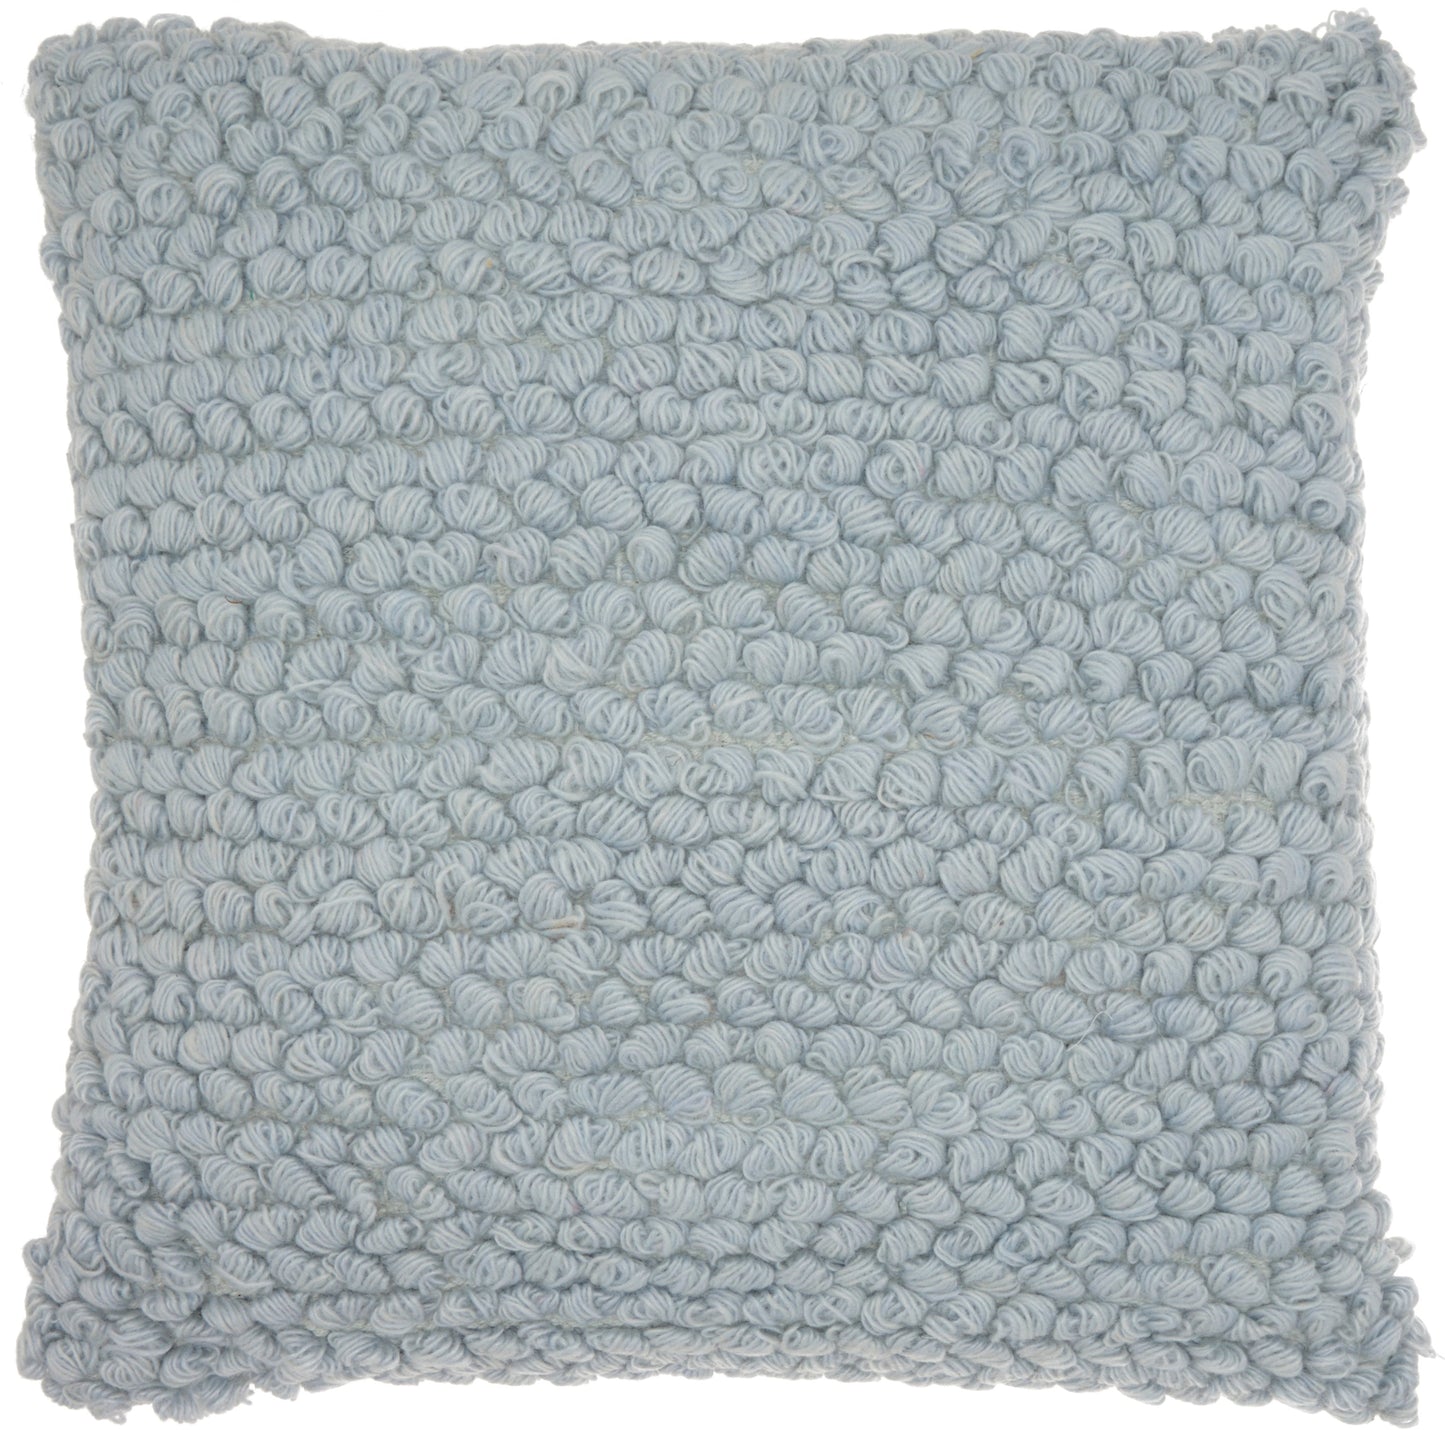 Life Styles DC142 Wool Thin Group Loops Throw Pillow From Mina Victory By Nourison Rugs